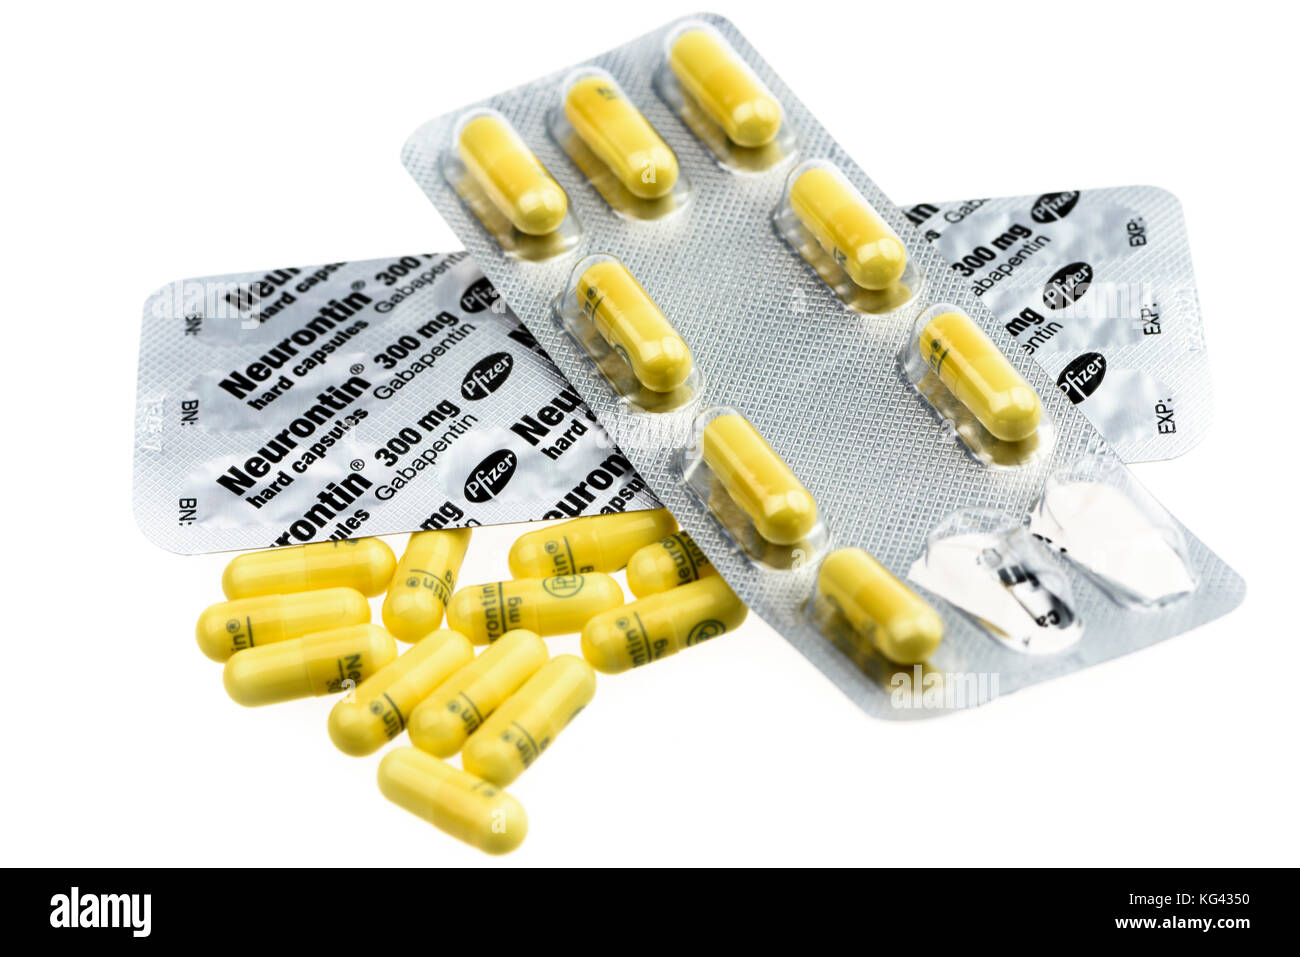 Gabapentin tablets and blister pack, a prescription medicine used for severe neuropathic pain. Stock Photo